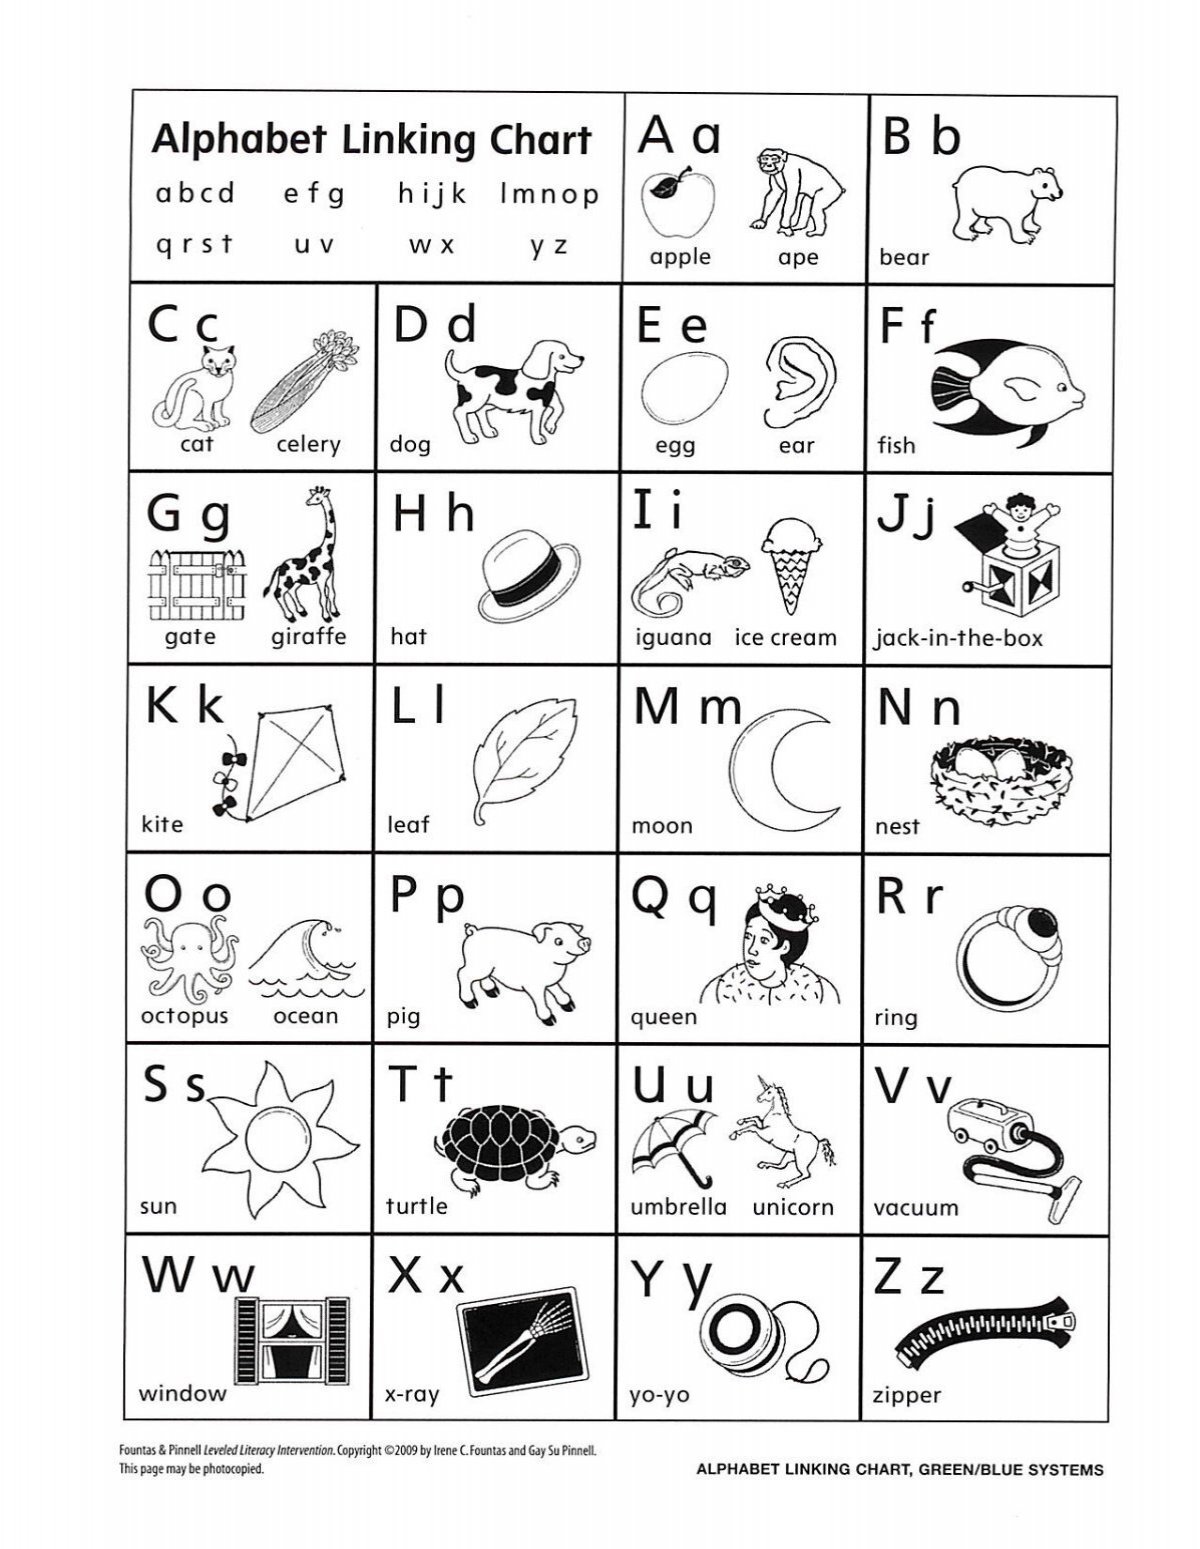 Alphabet and Consonant Cluster Linking Chart - GSSD Blogs